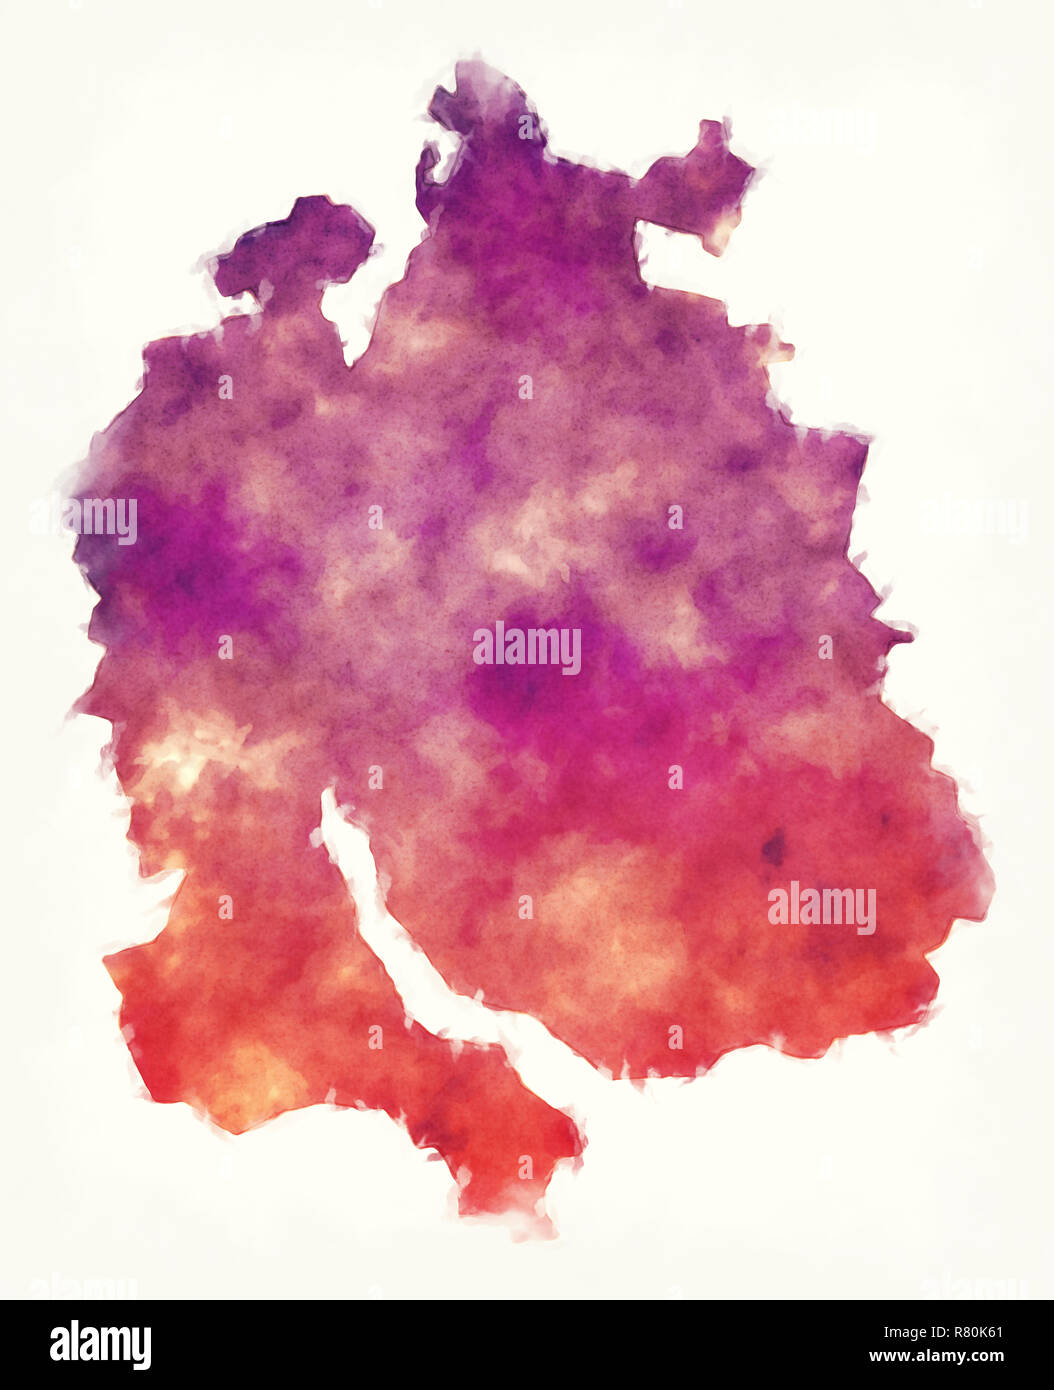 Zurich canton watercolor map of Switzerland in front of a white background Stock Photo